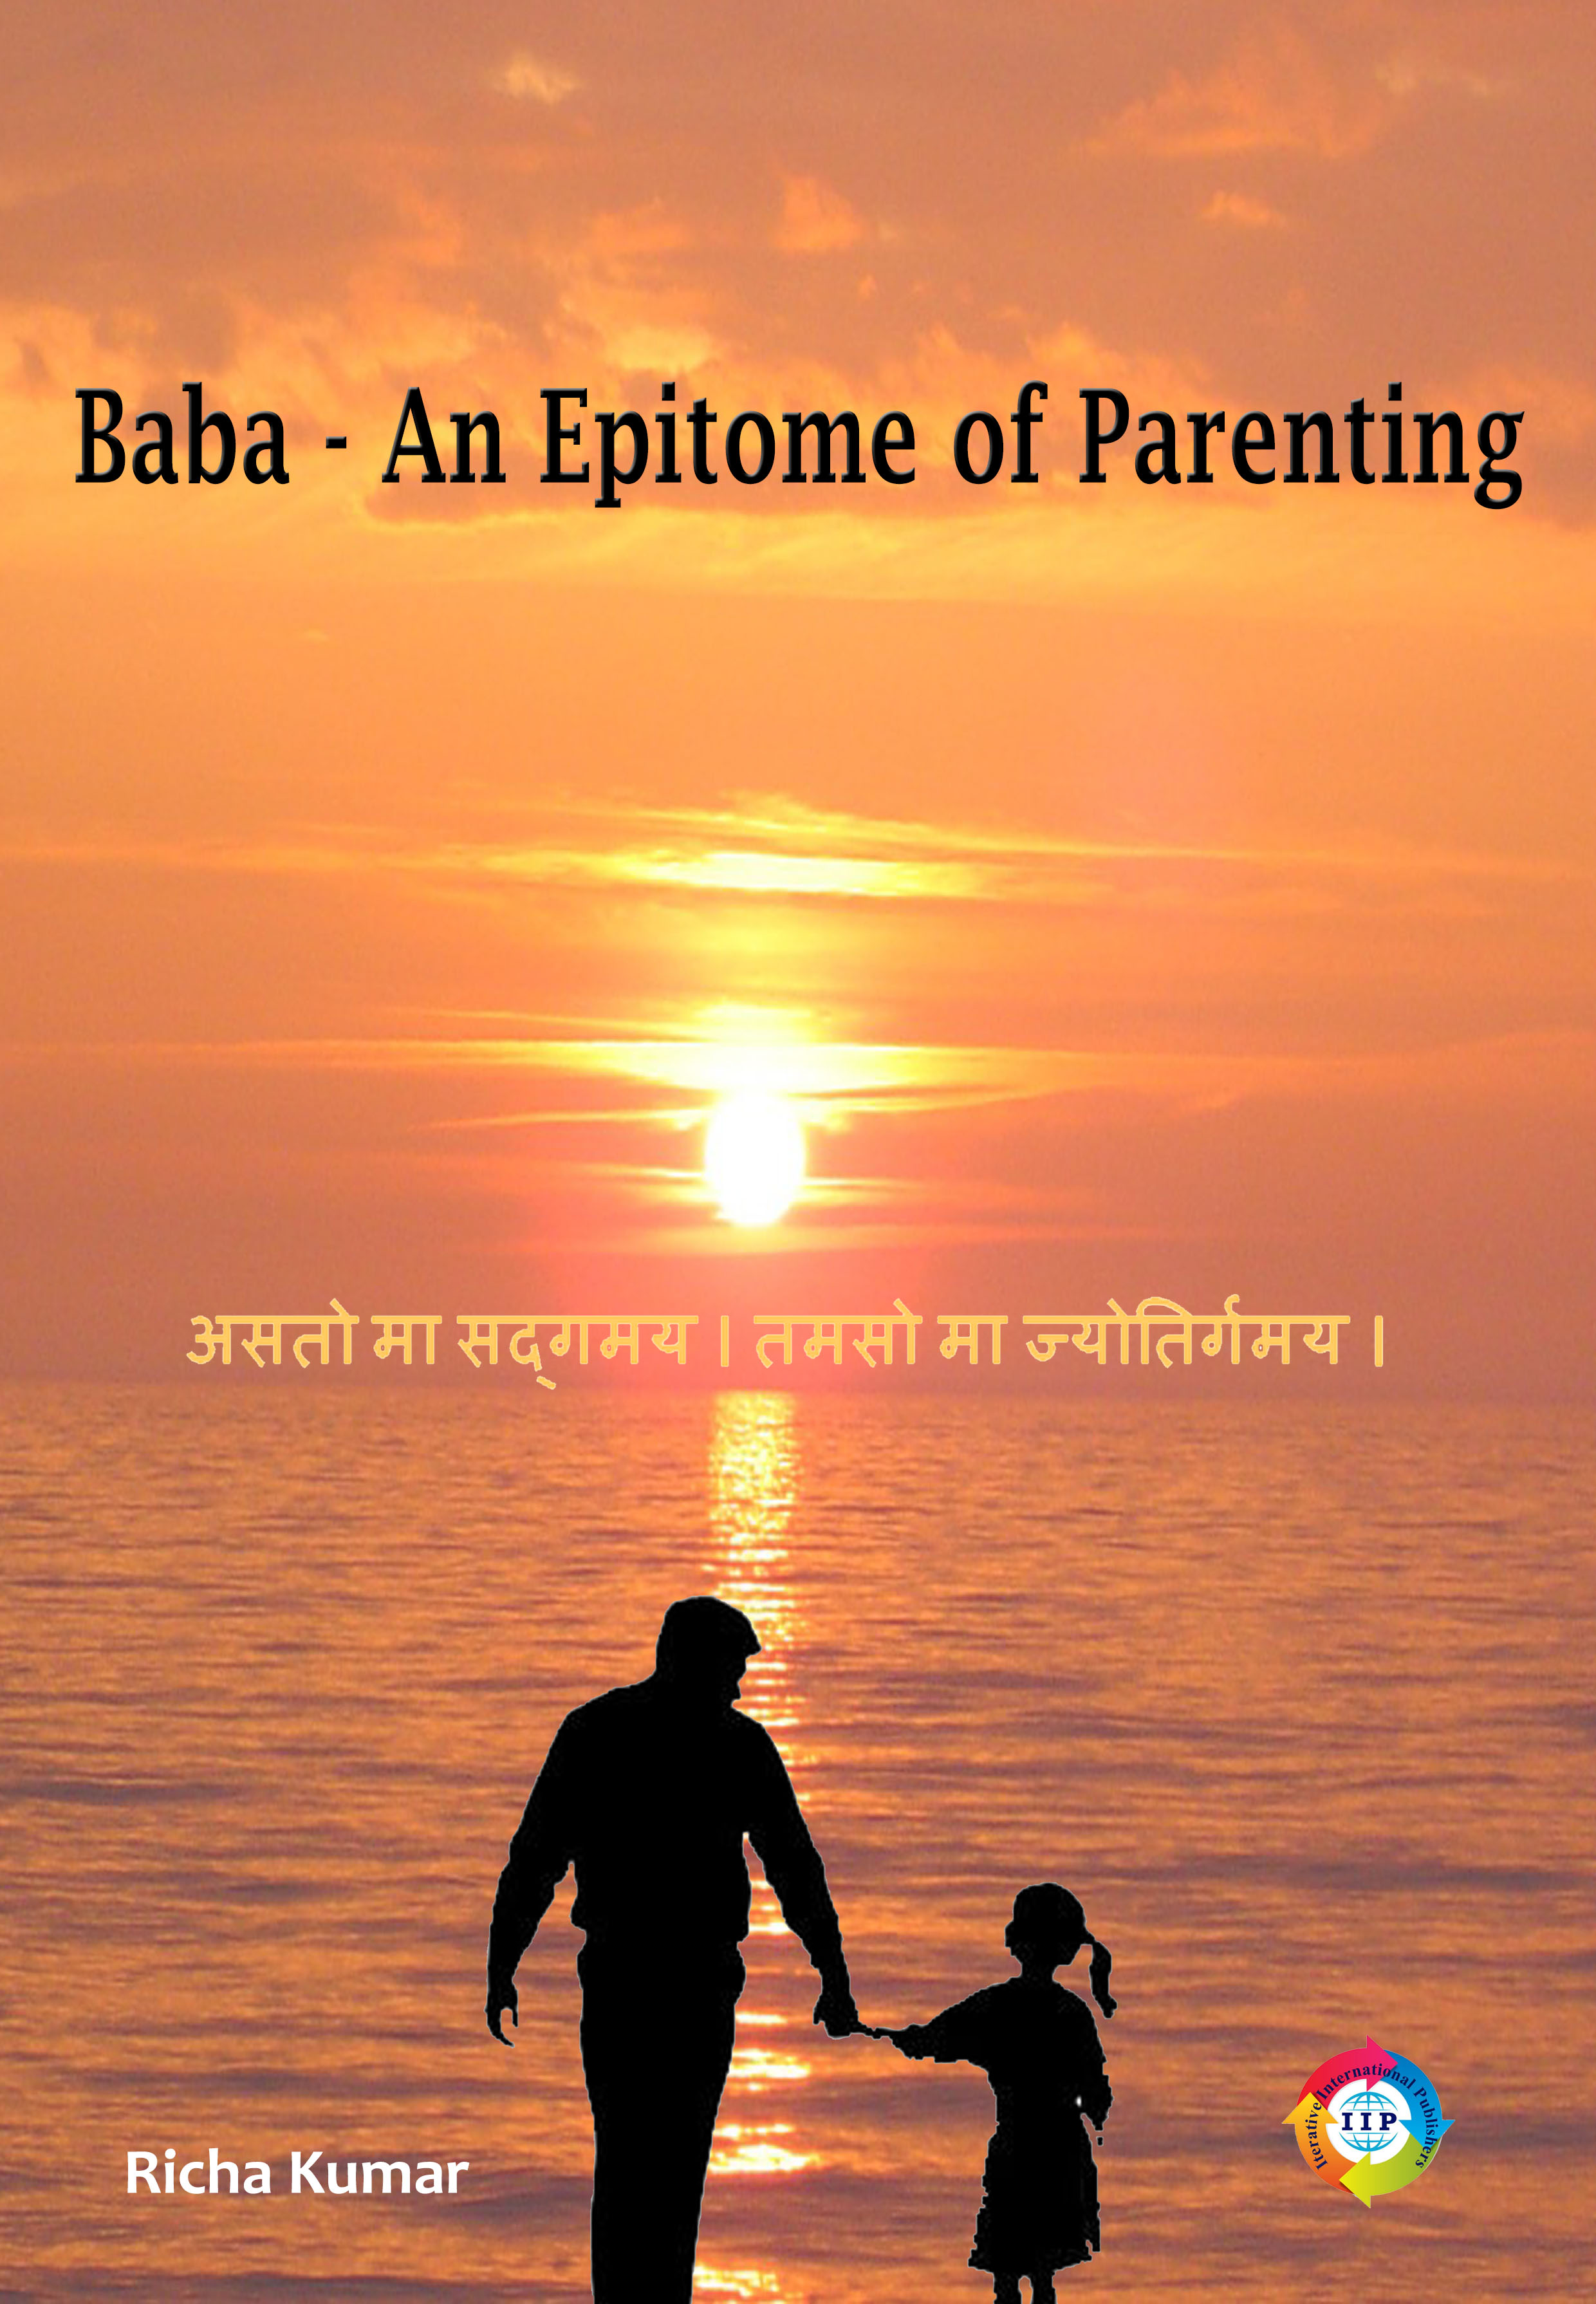 BABA-AN EPITOME OF PARENTING